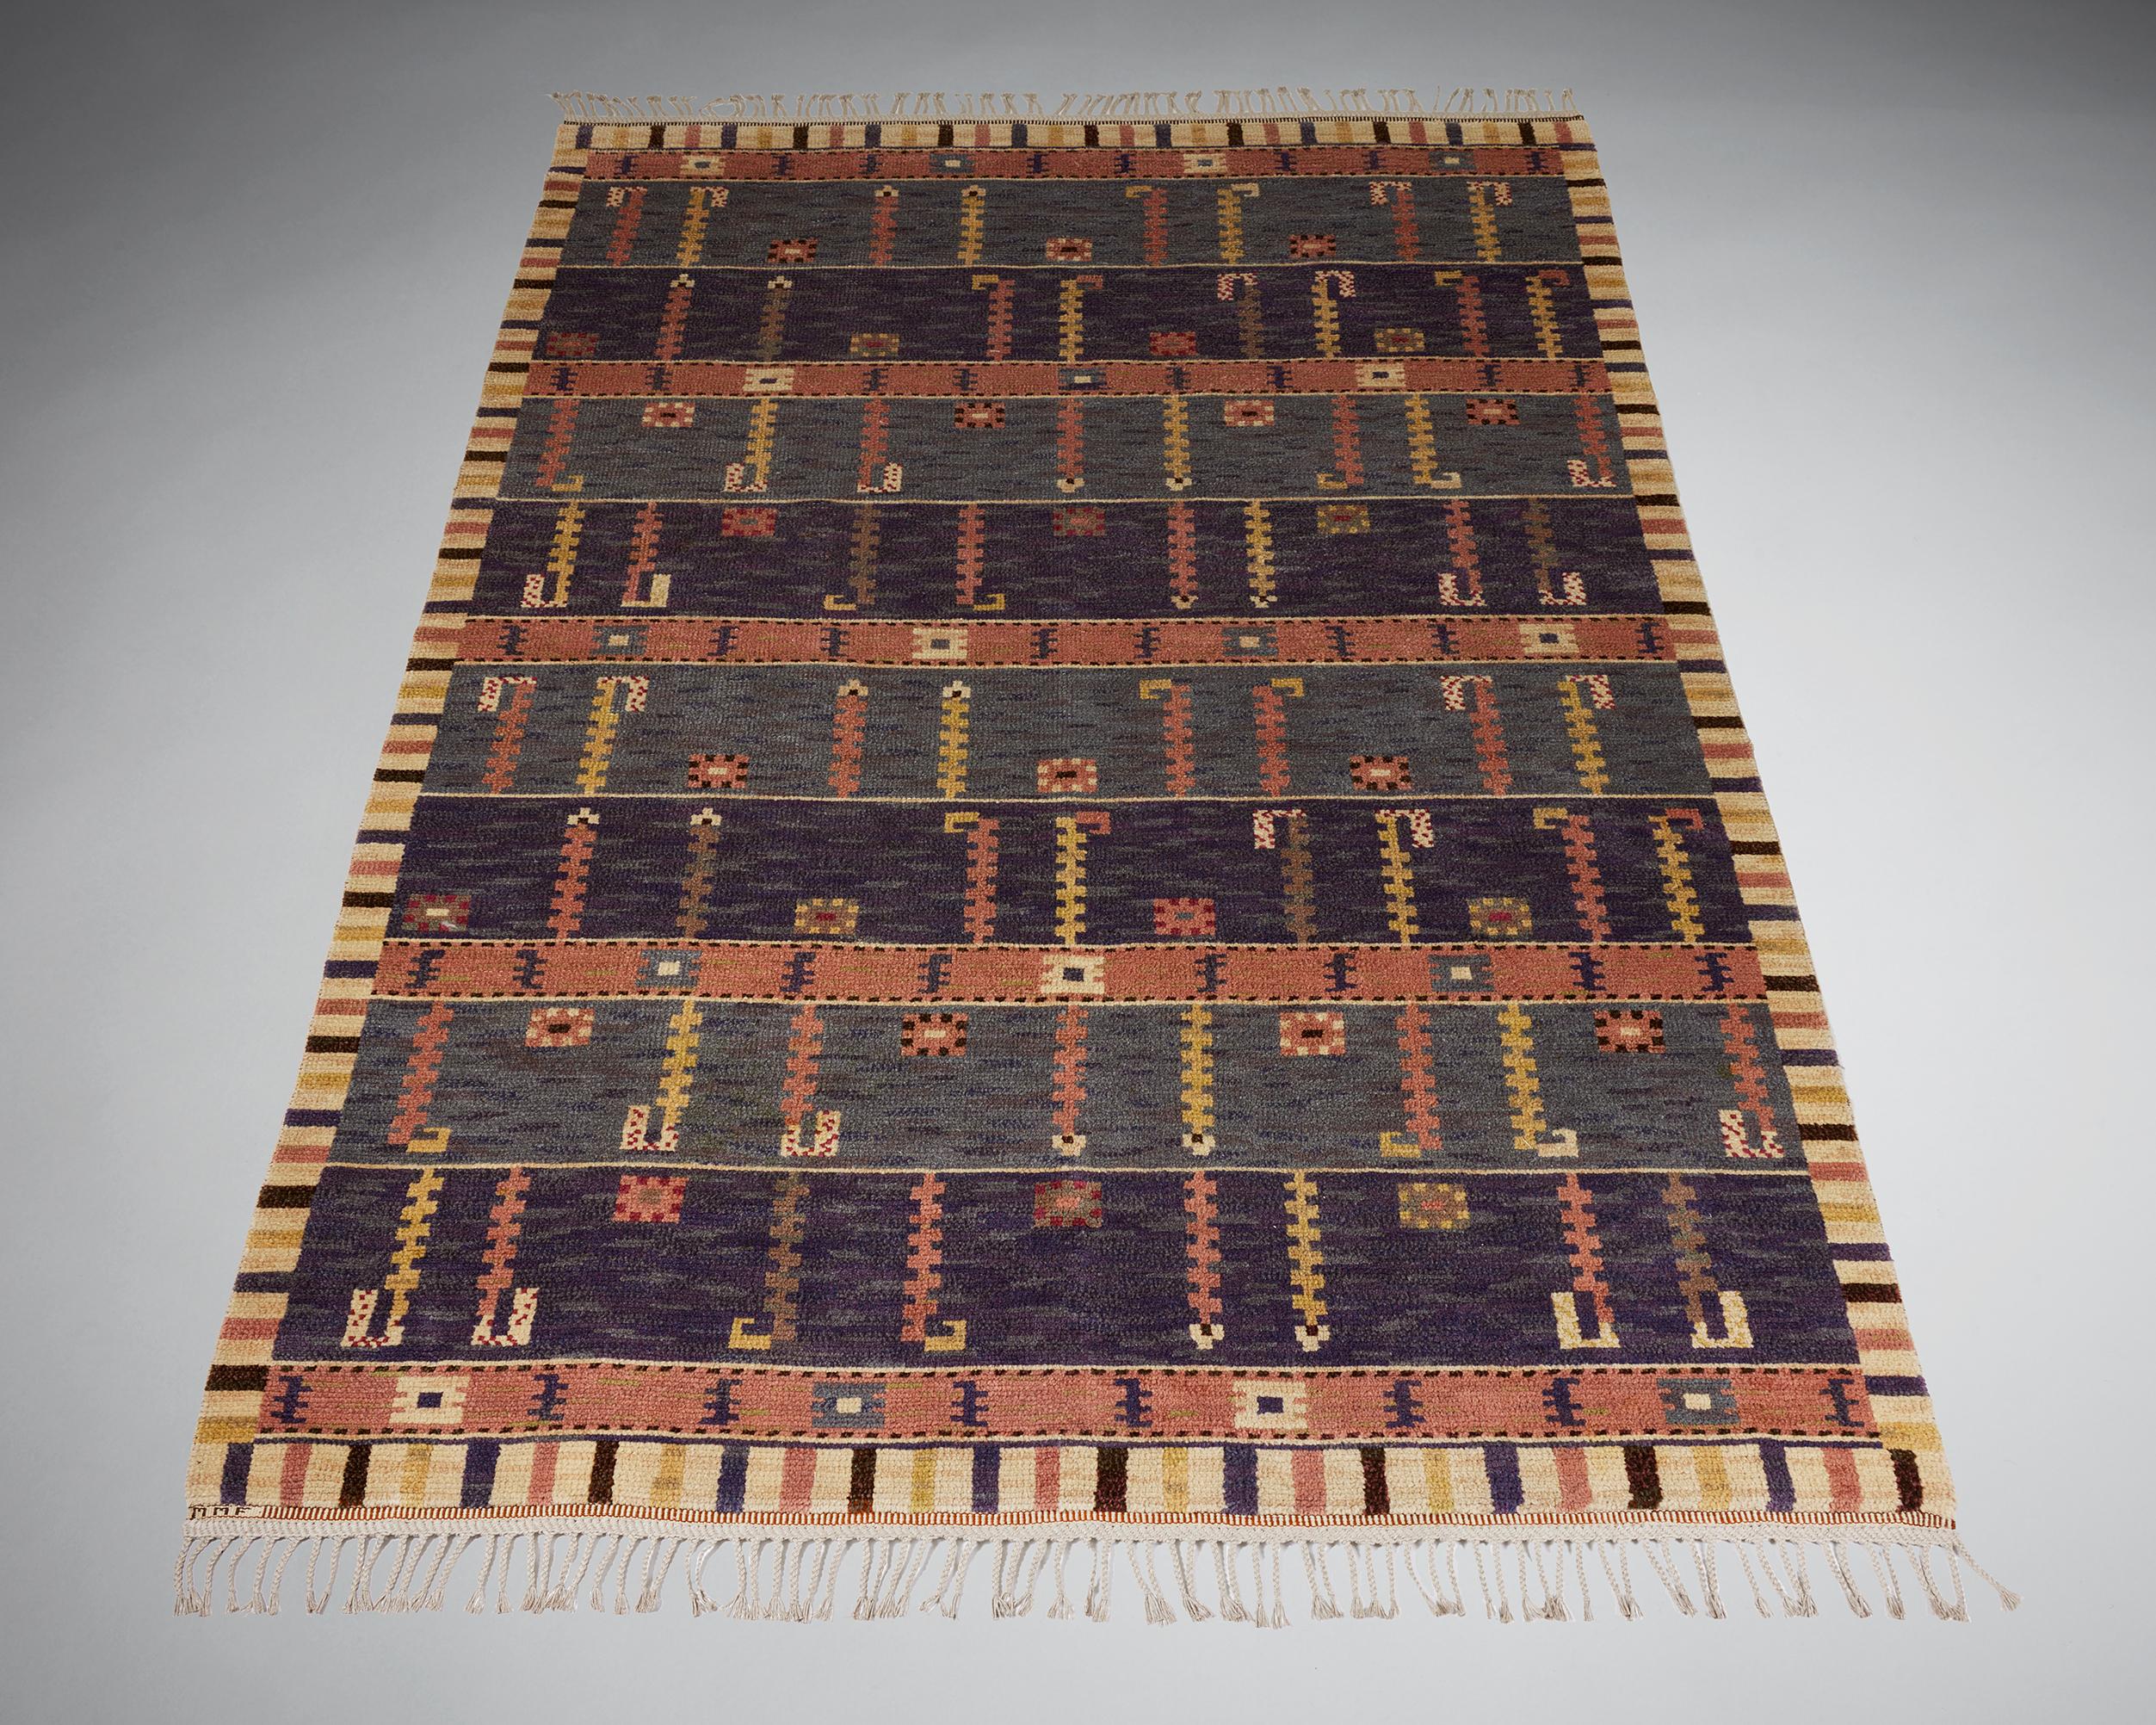 Rug ‘Ståndaren’ designed by Märta Måås-Fjetterström for MMF,
Sweden, 1928.

Wool.

Signed.

This example was woven before 1942. The pattern 